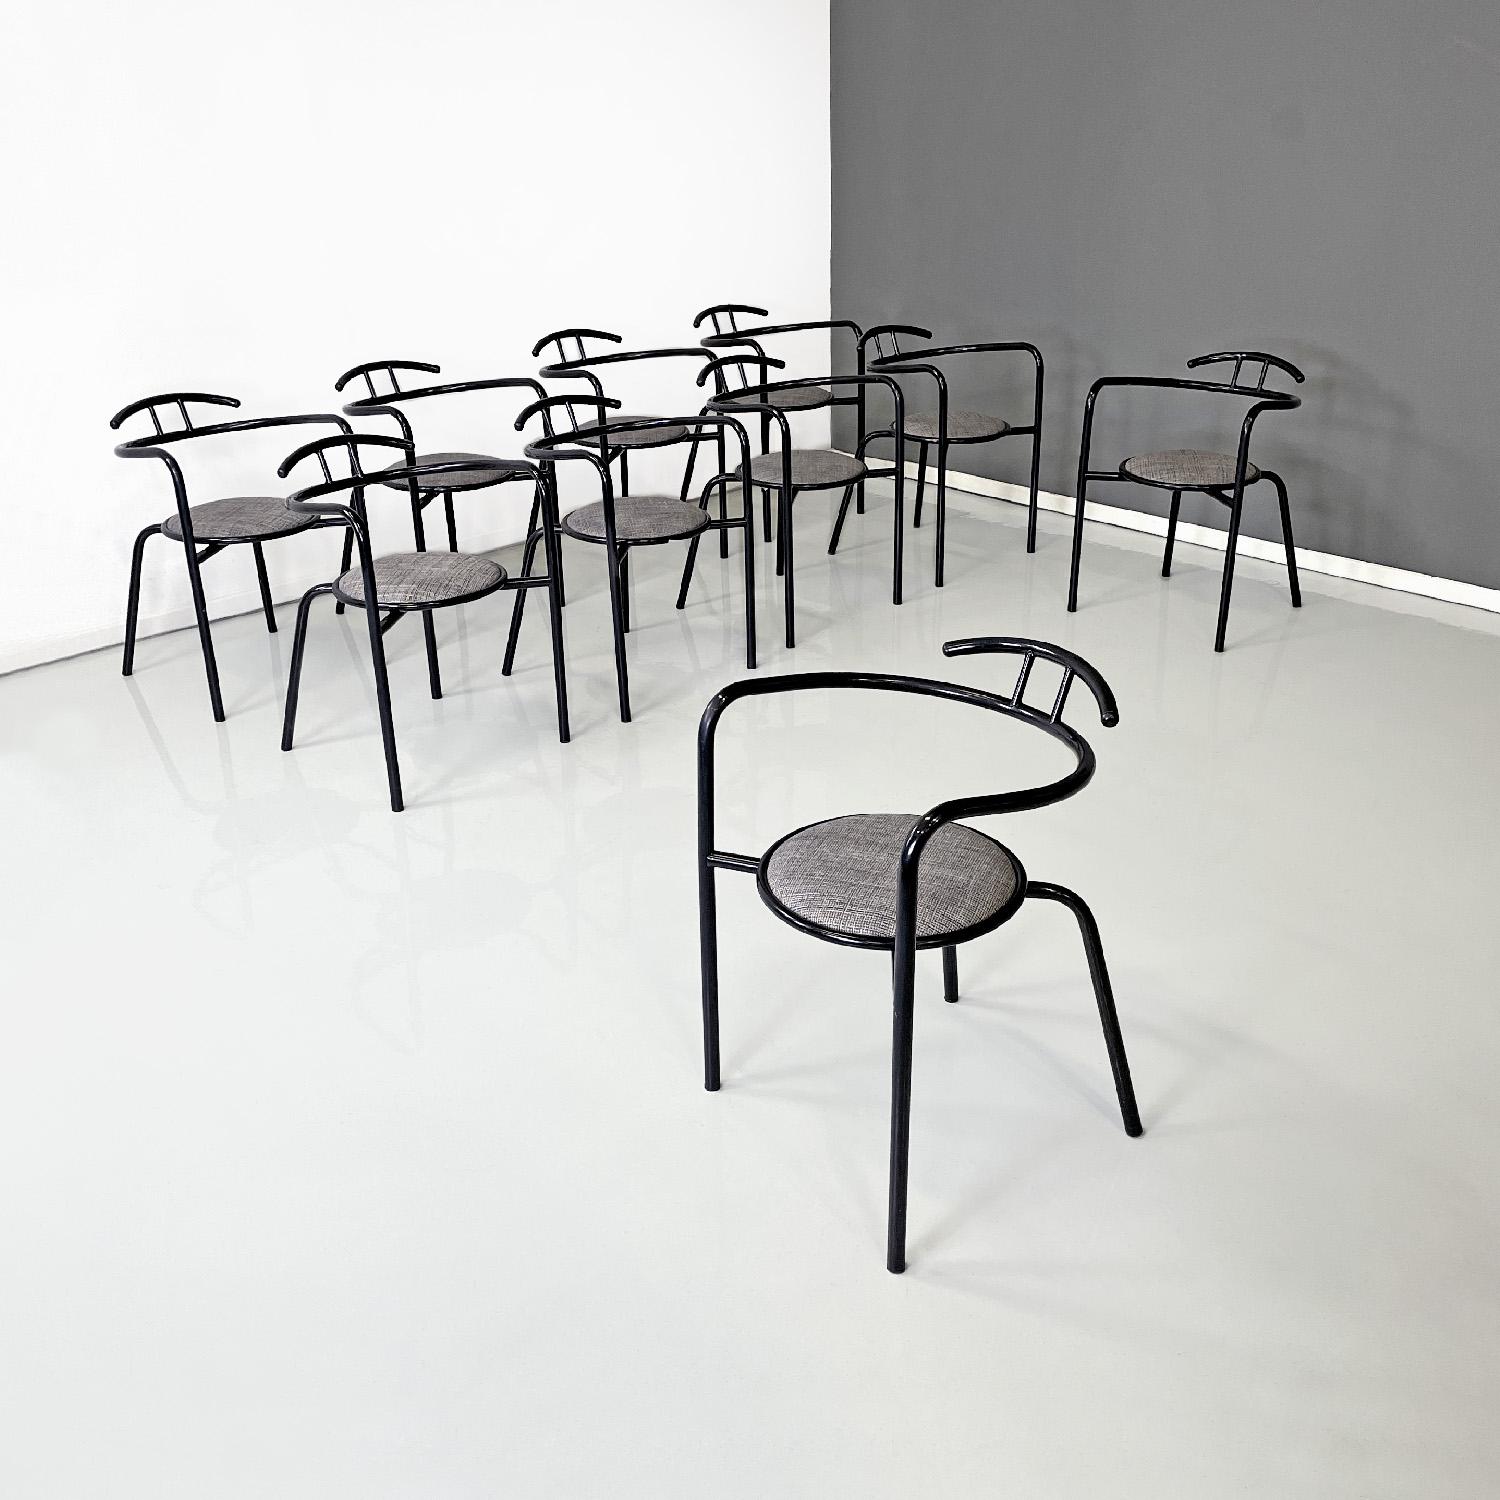 Italian modern black metal and grey fabric chairs with round seats, 1980s
Set of ten chairs with round seats. The structure is in black painted metal rod which curves to form the armrests and the backrest, which has an additional support element.